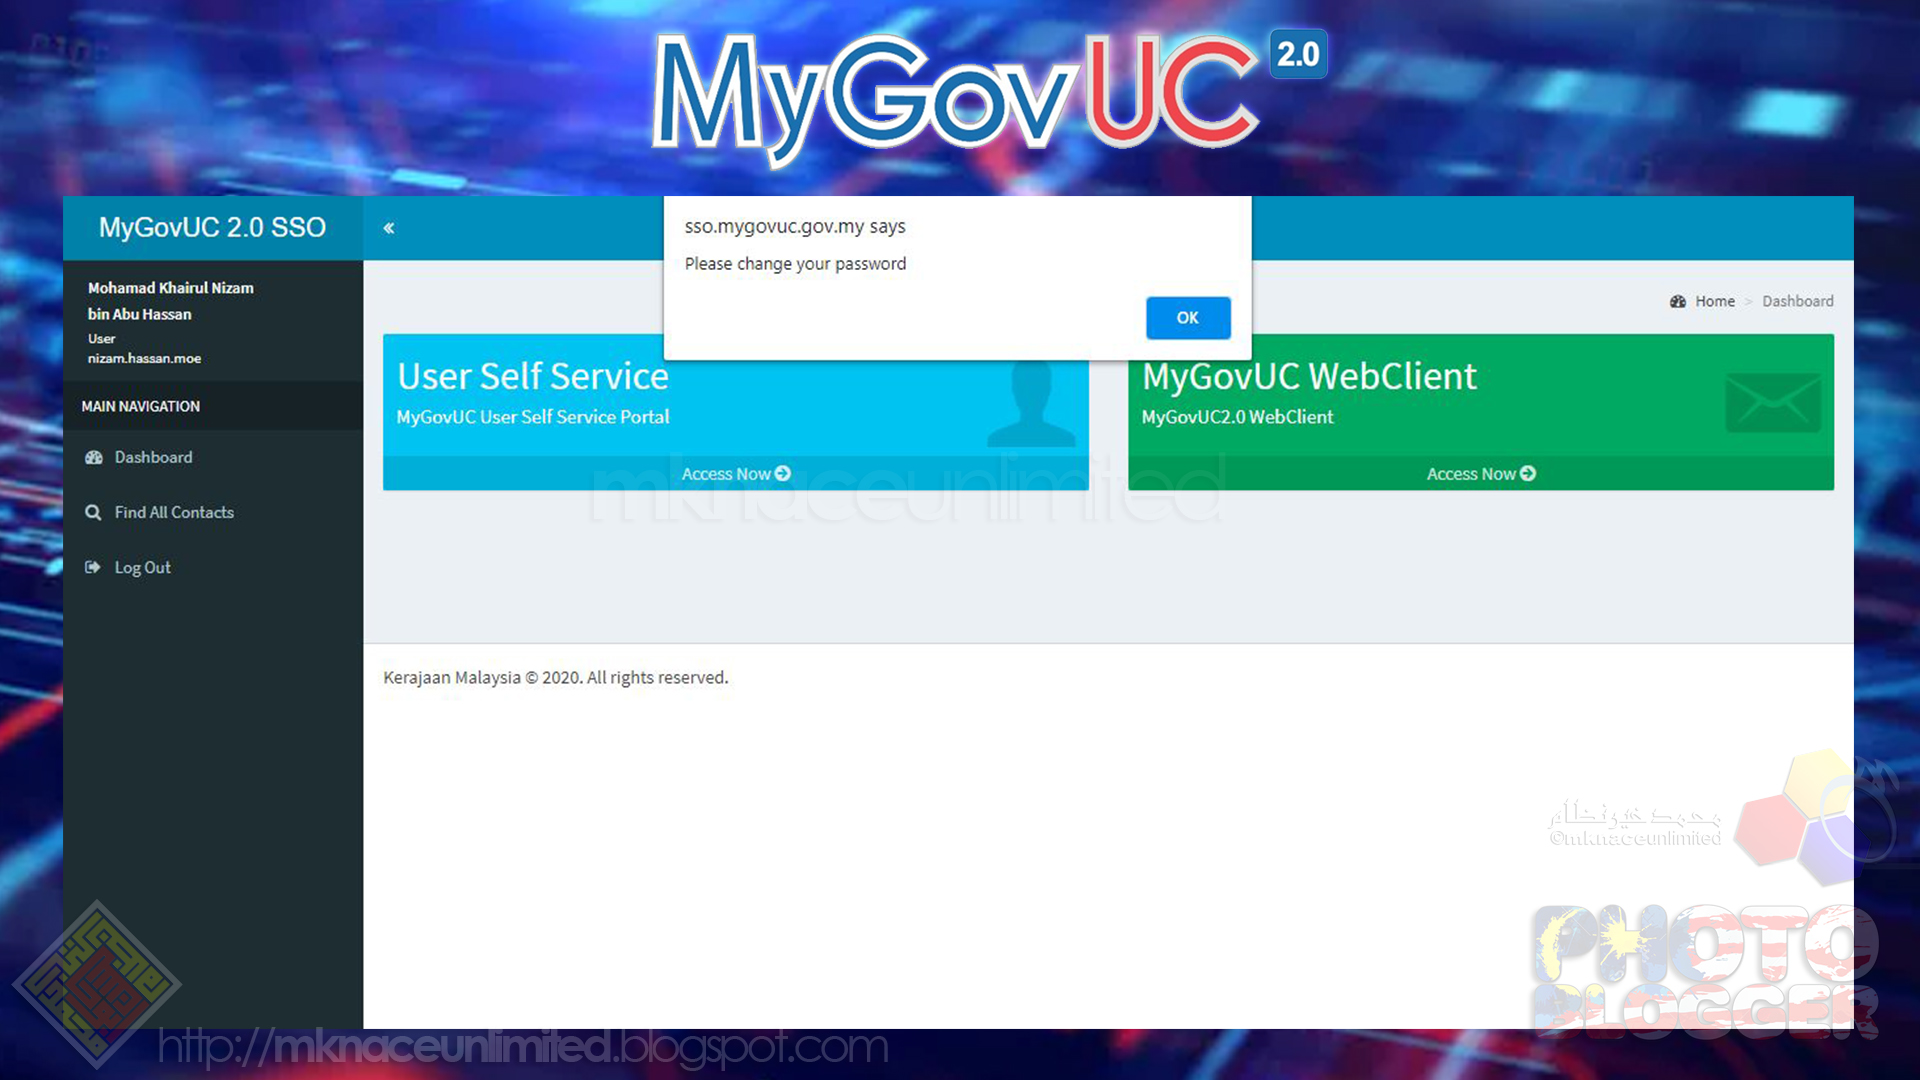 Email 1govuc 2.0